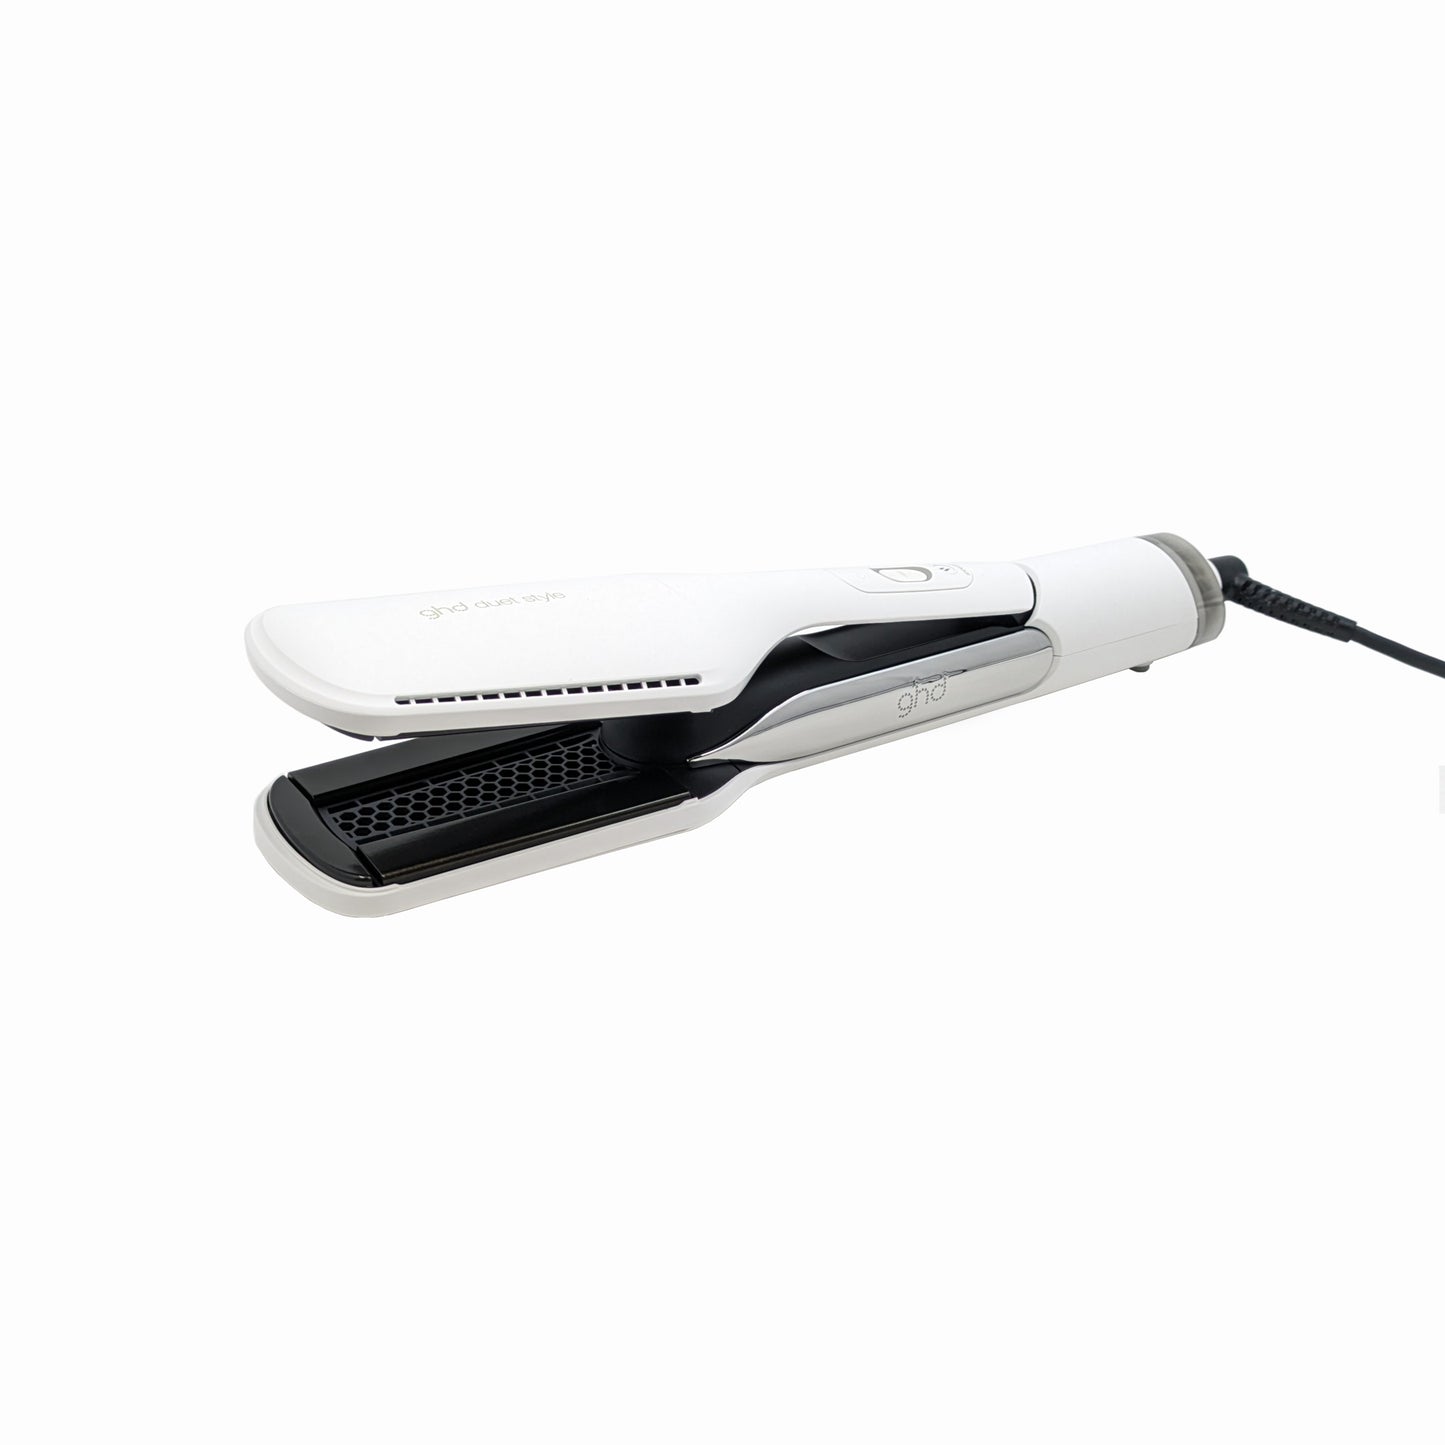 ghd Duet Style Pro 2-in-1 Hot Air Styler White - Ex Display Imperfect Box